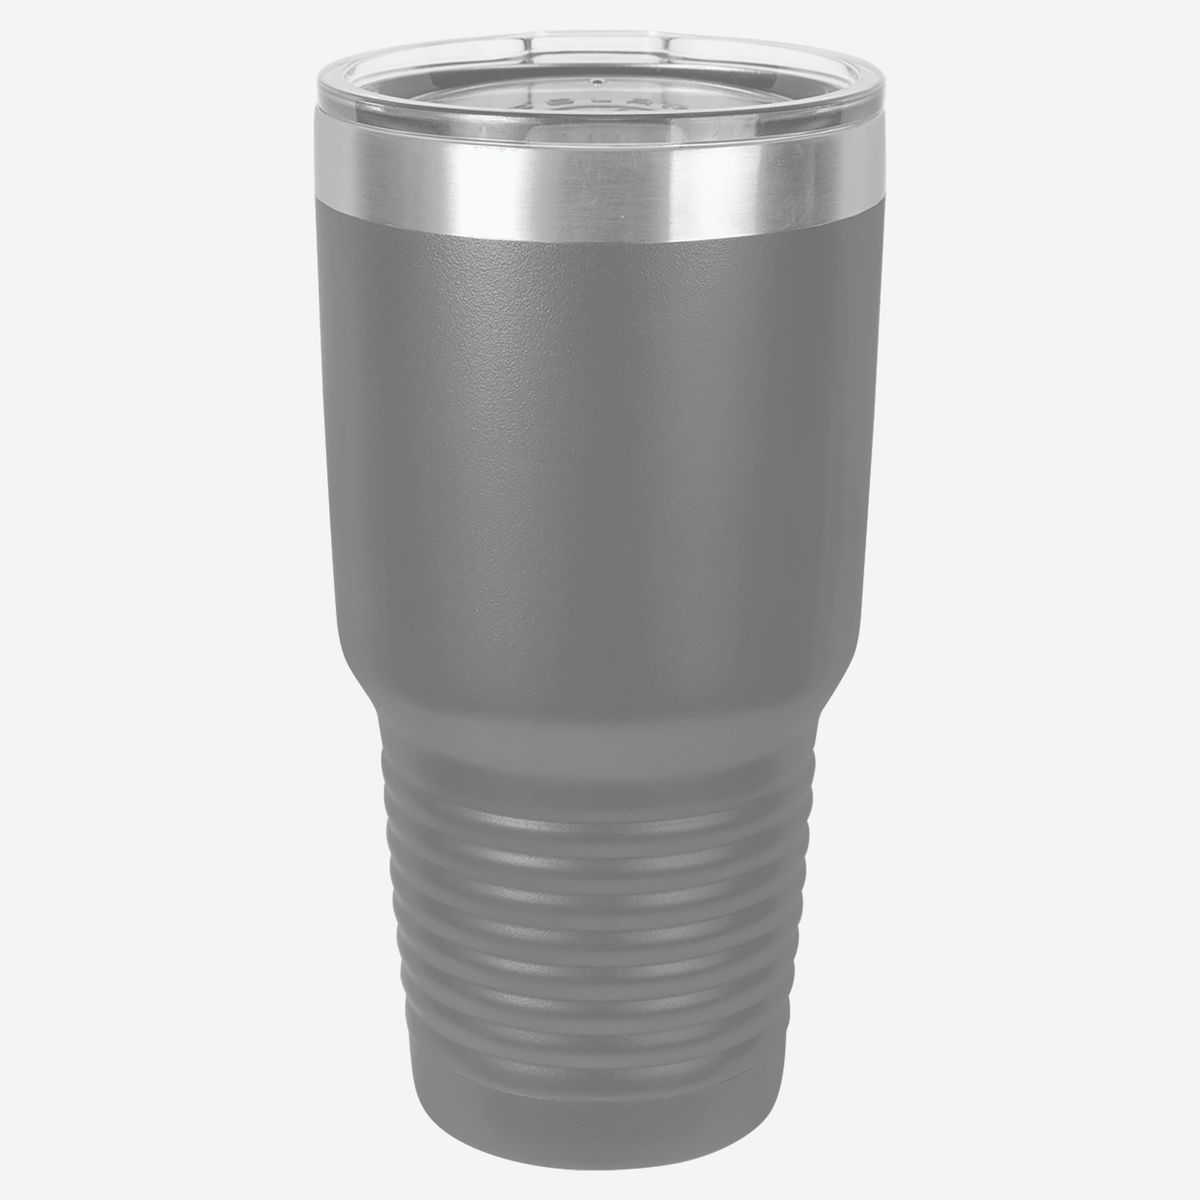 30 oz. dark gray stainless steel tumbler with silver ring at top clear lid